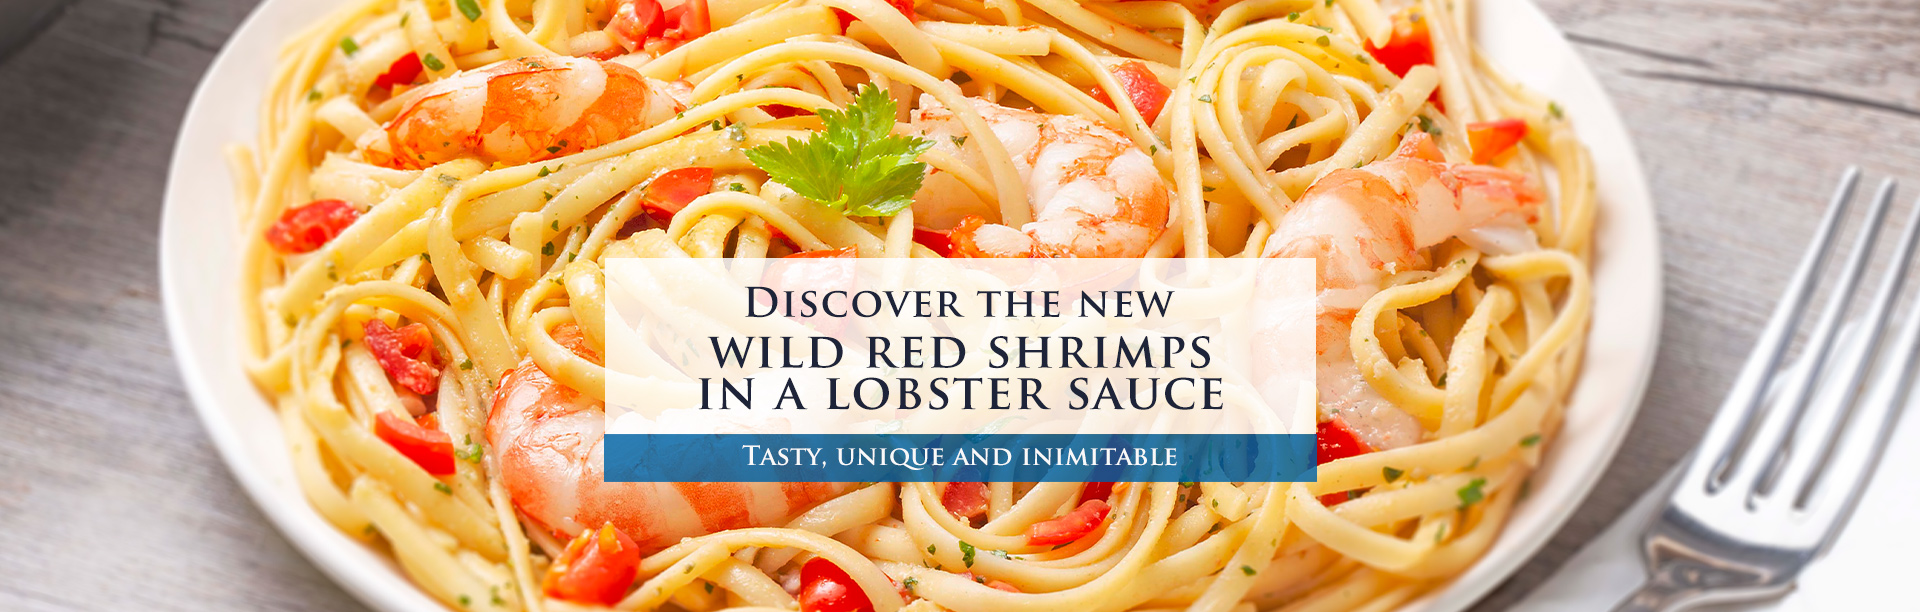 Discover the new wild red shrimps in a lobster sauce Tasty, unique and inimitable